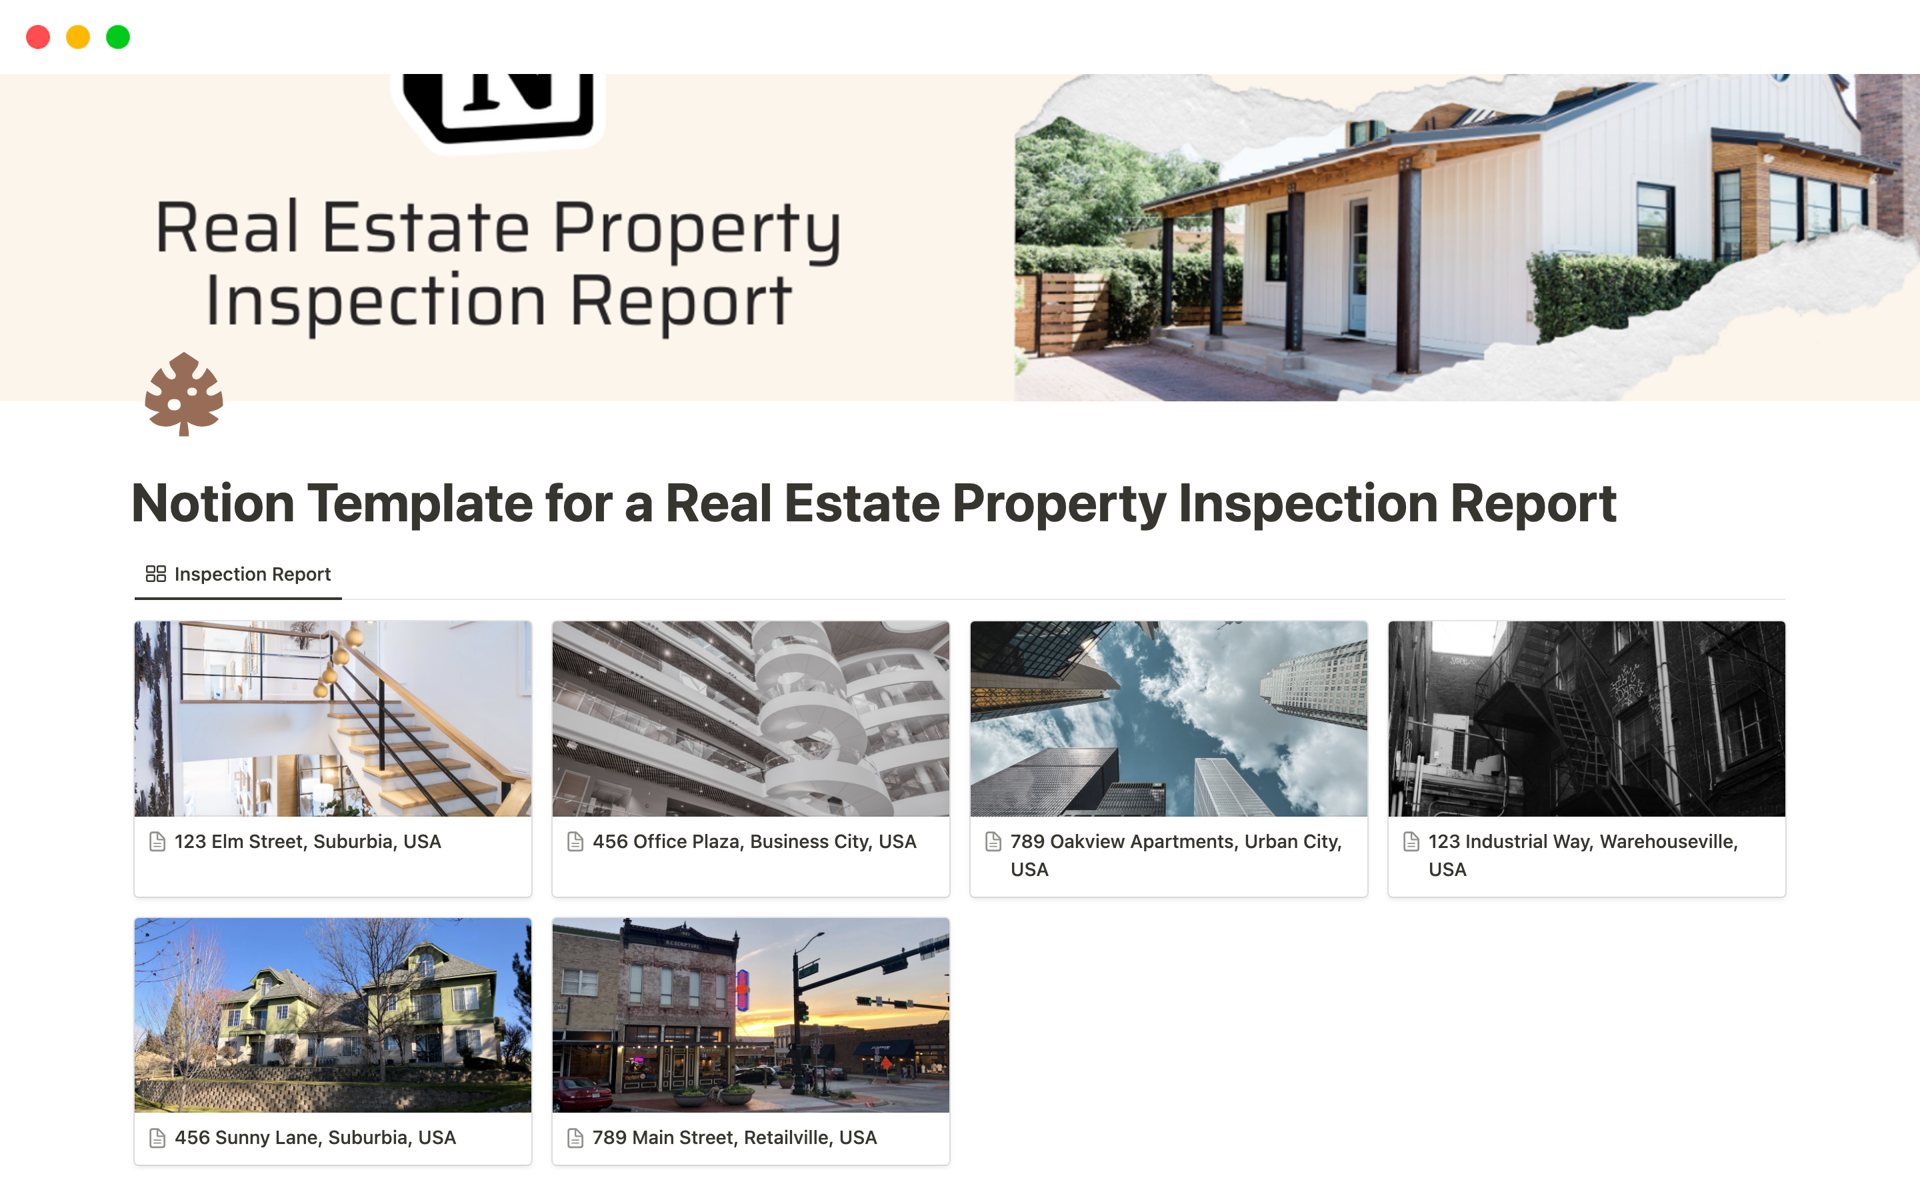 Experience a revolution in the world of real estate inspections with our "Notion Template for a Real Estate Property Inspection Report." This meticulously crafted template empowers property inspectors, agents, and homeowners to effortlessly document and share inspection findings.